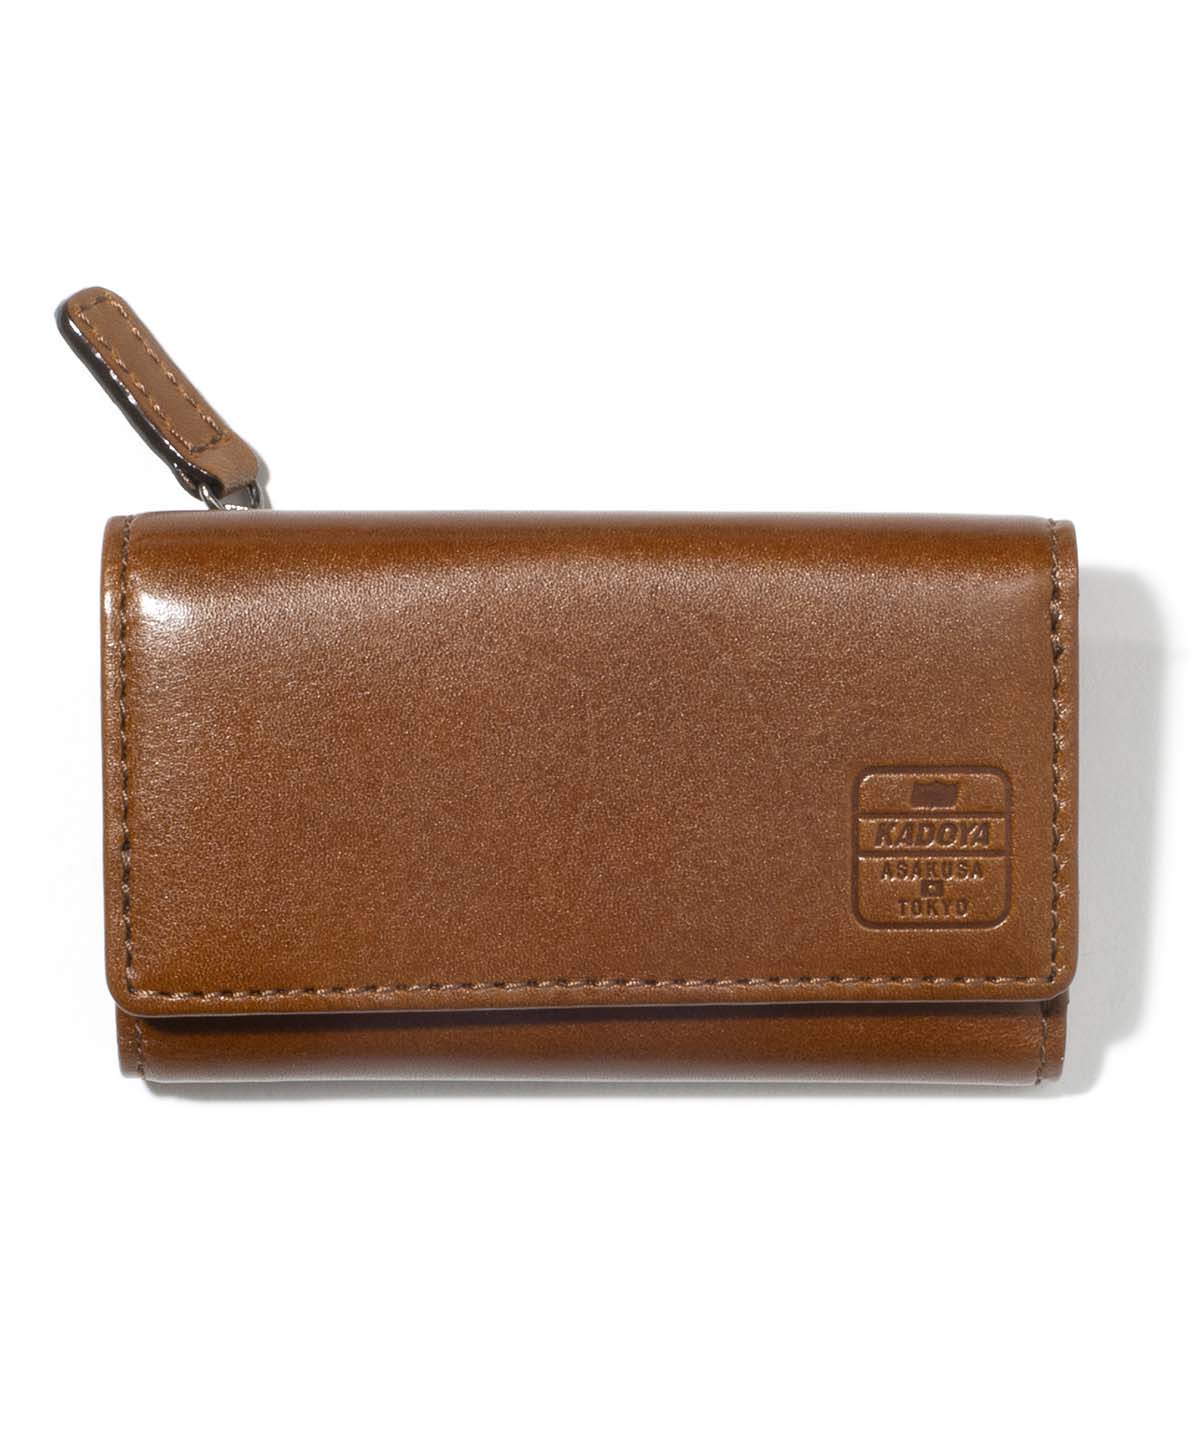 KEY CASE COMPACT WALLET / ブラウン